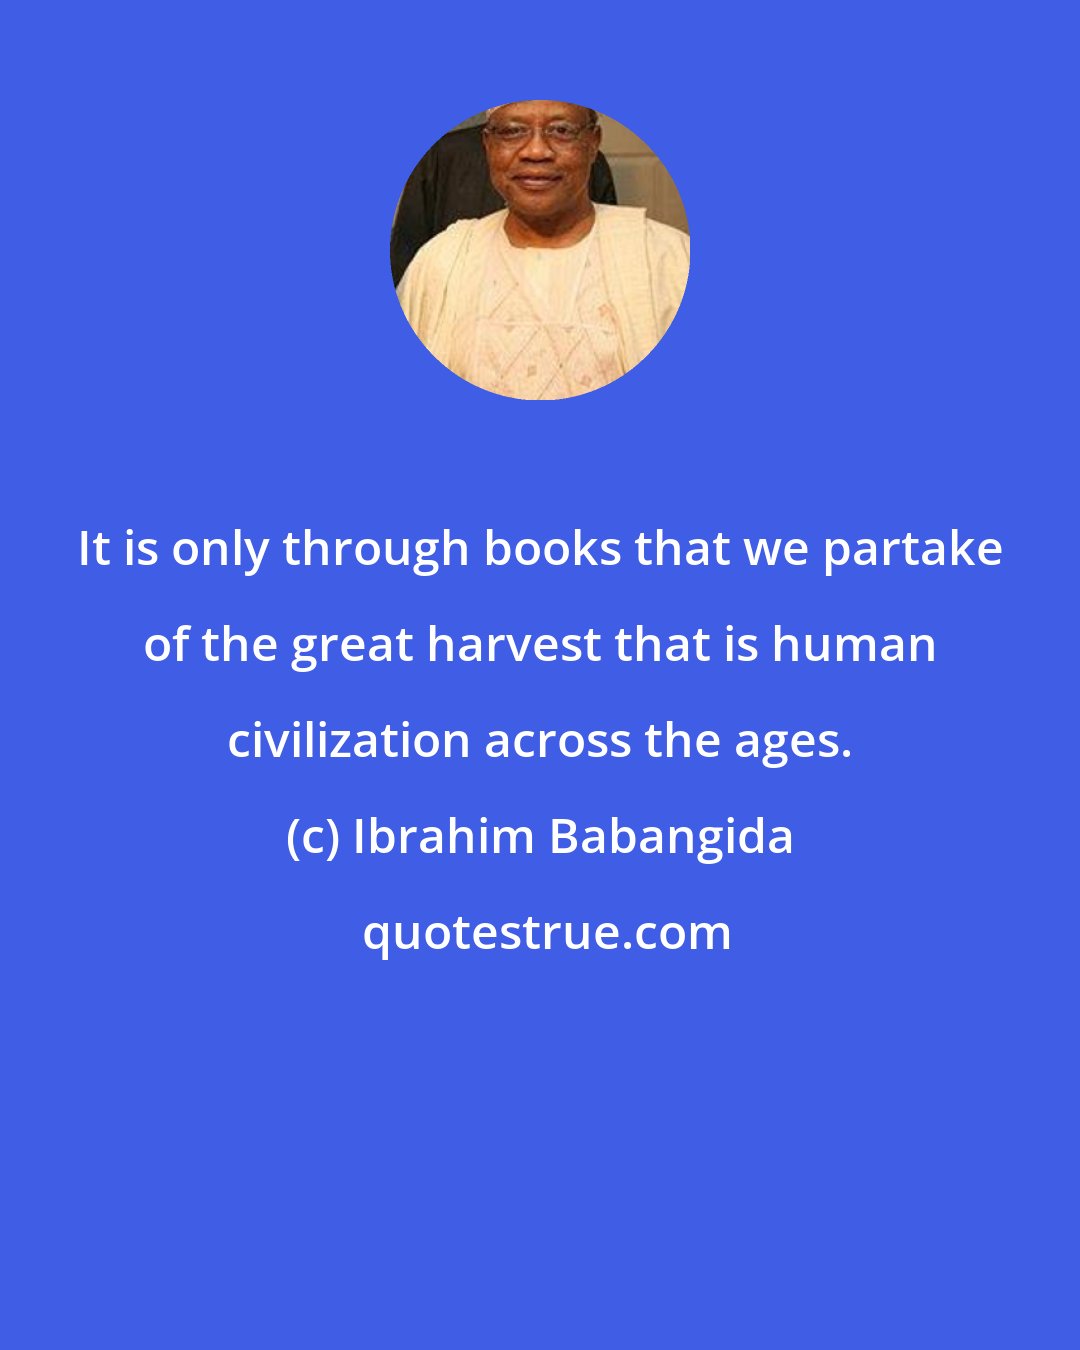 Ibrahim Babangida: It is only through books that we partake of the great harvest that is human civilization across the ages.